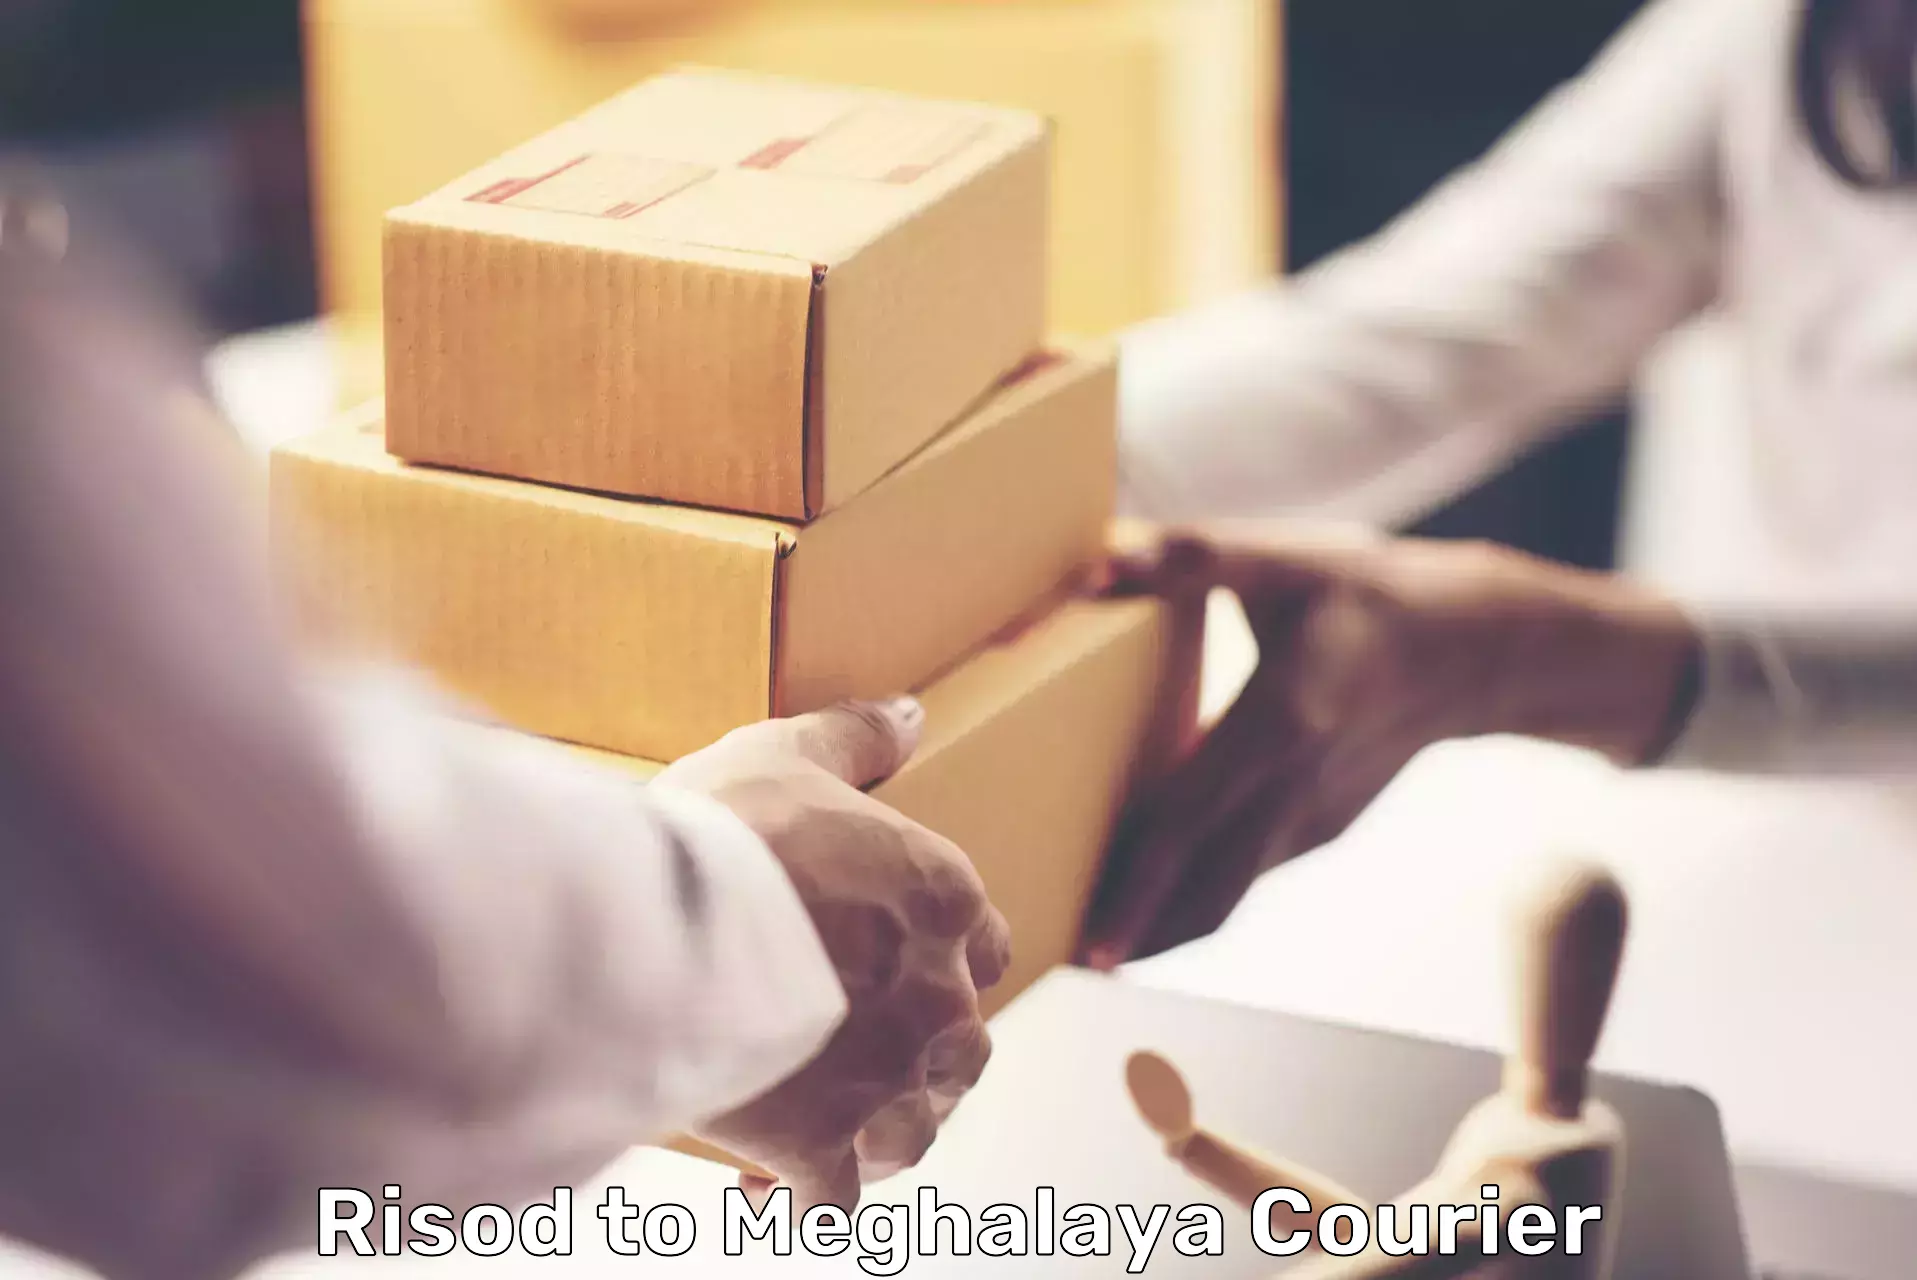 Global courier networks Risod to Phulbari